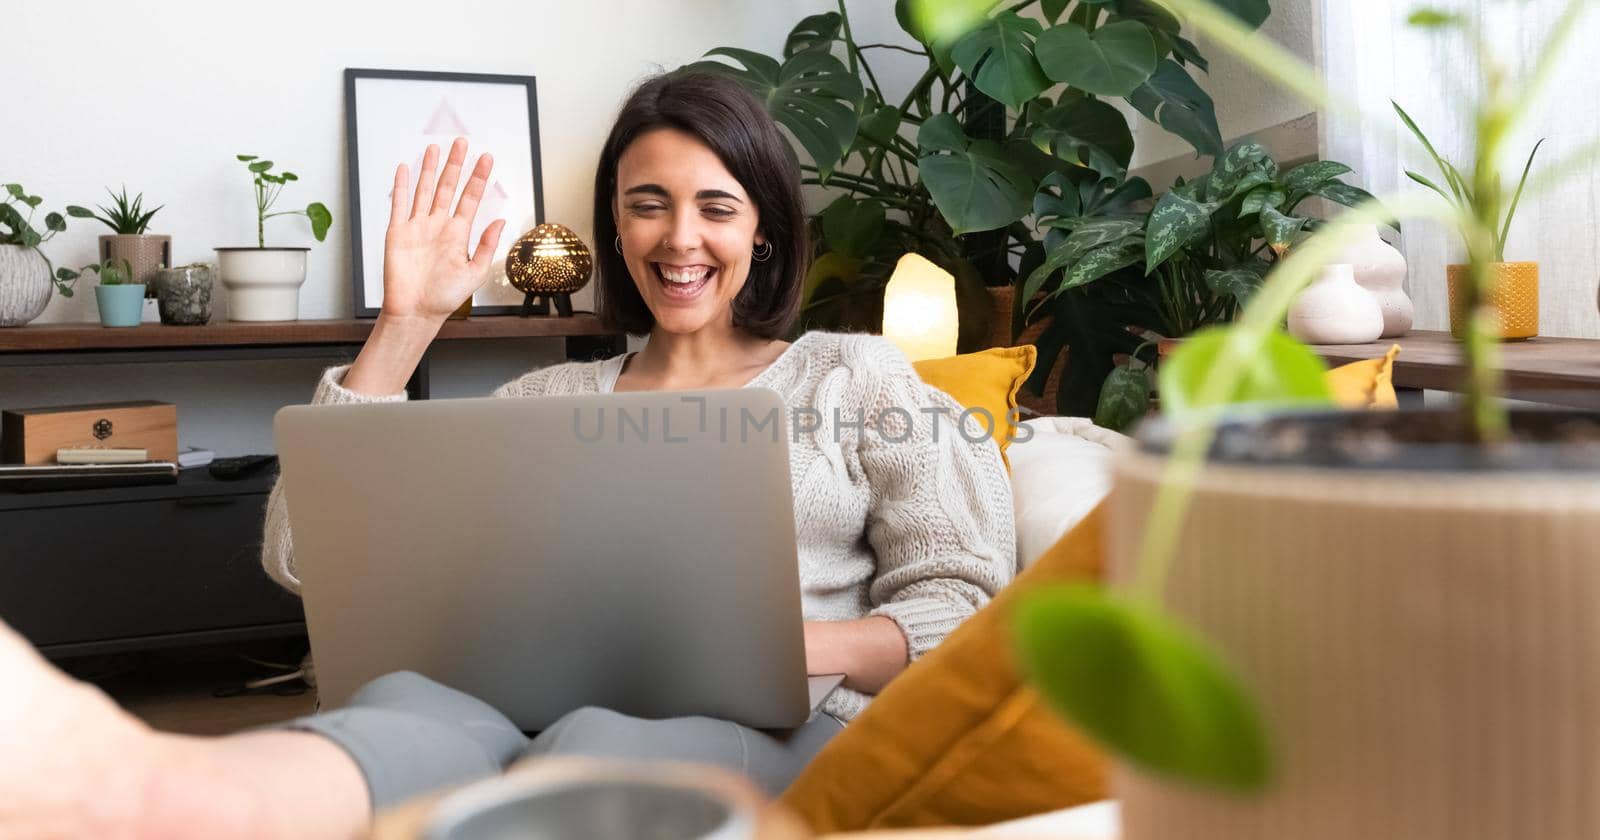 Panoramic image of young happy caucasian woman waving hand hello during online video call at home cozy living room. Technology concept.